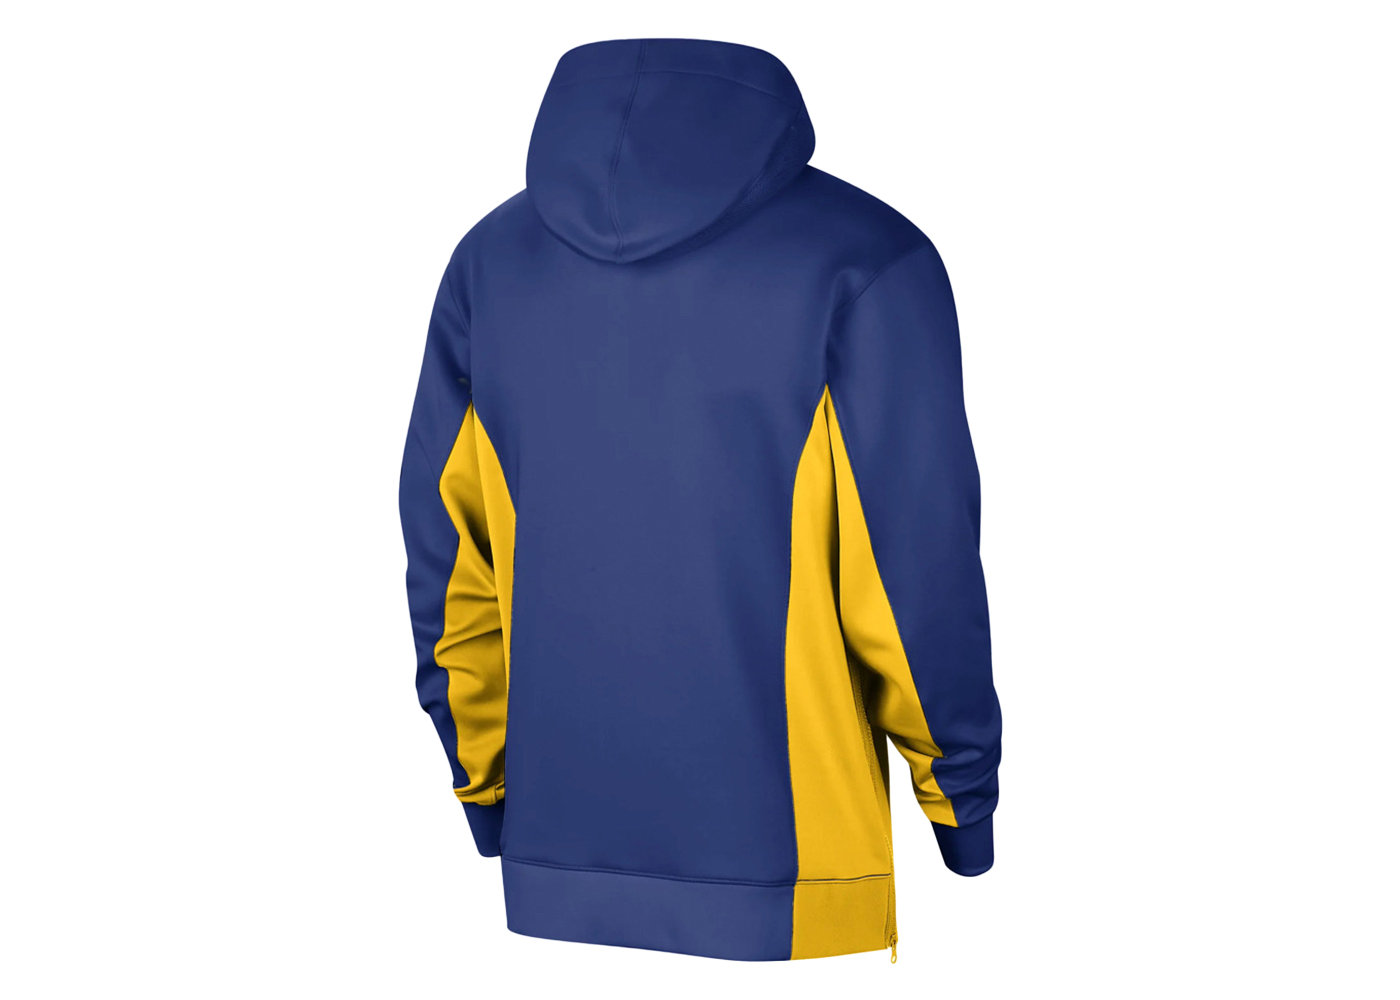 Nike NBA Golden State Warriors Showtime Dri-Fit Hoodie Gold/Blue 